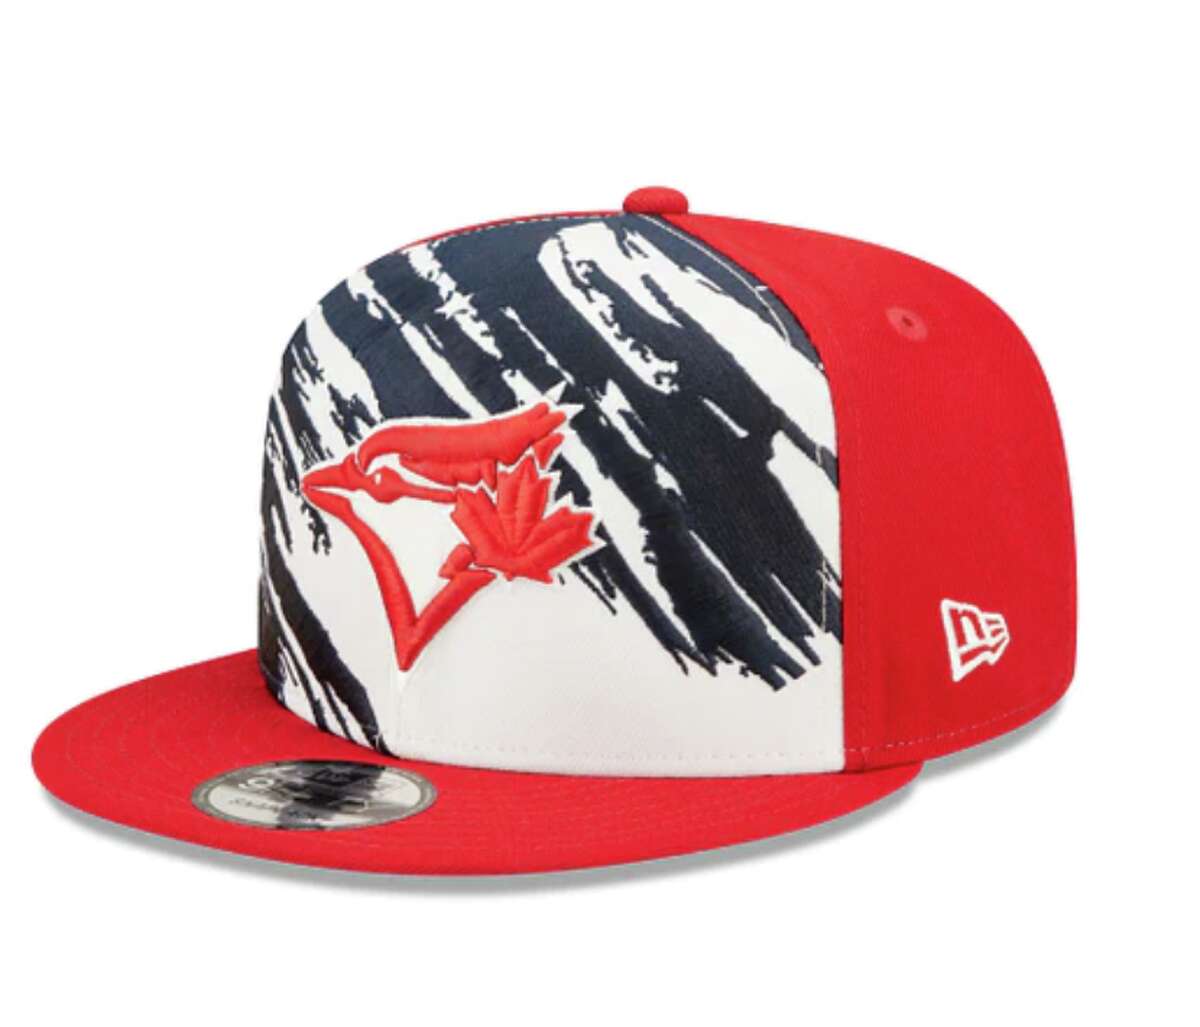 Major League Baseball, MLB, has 4th of July caps for every team